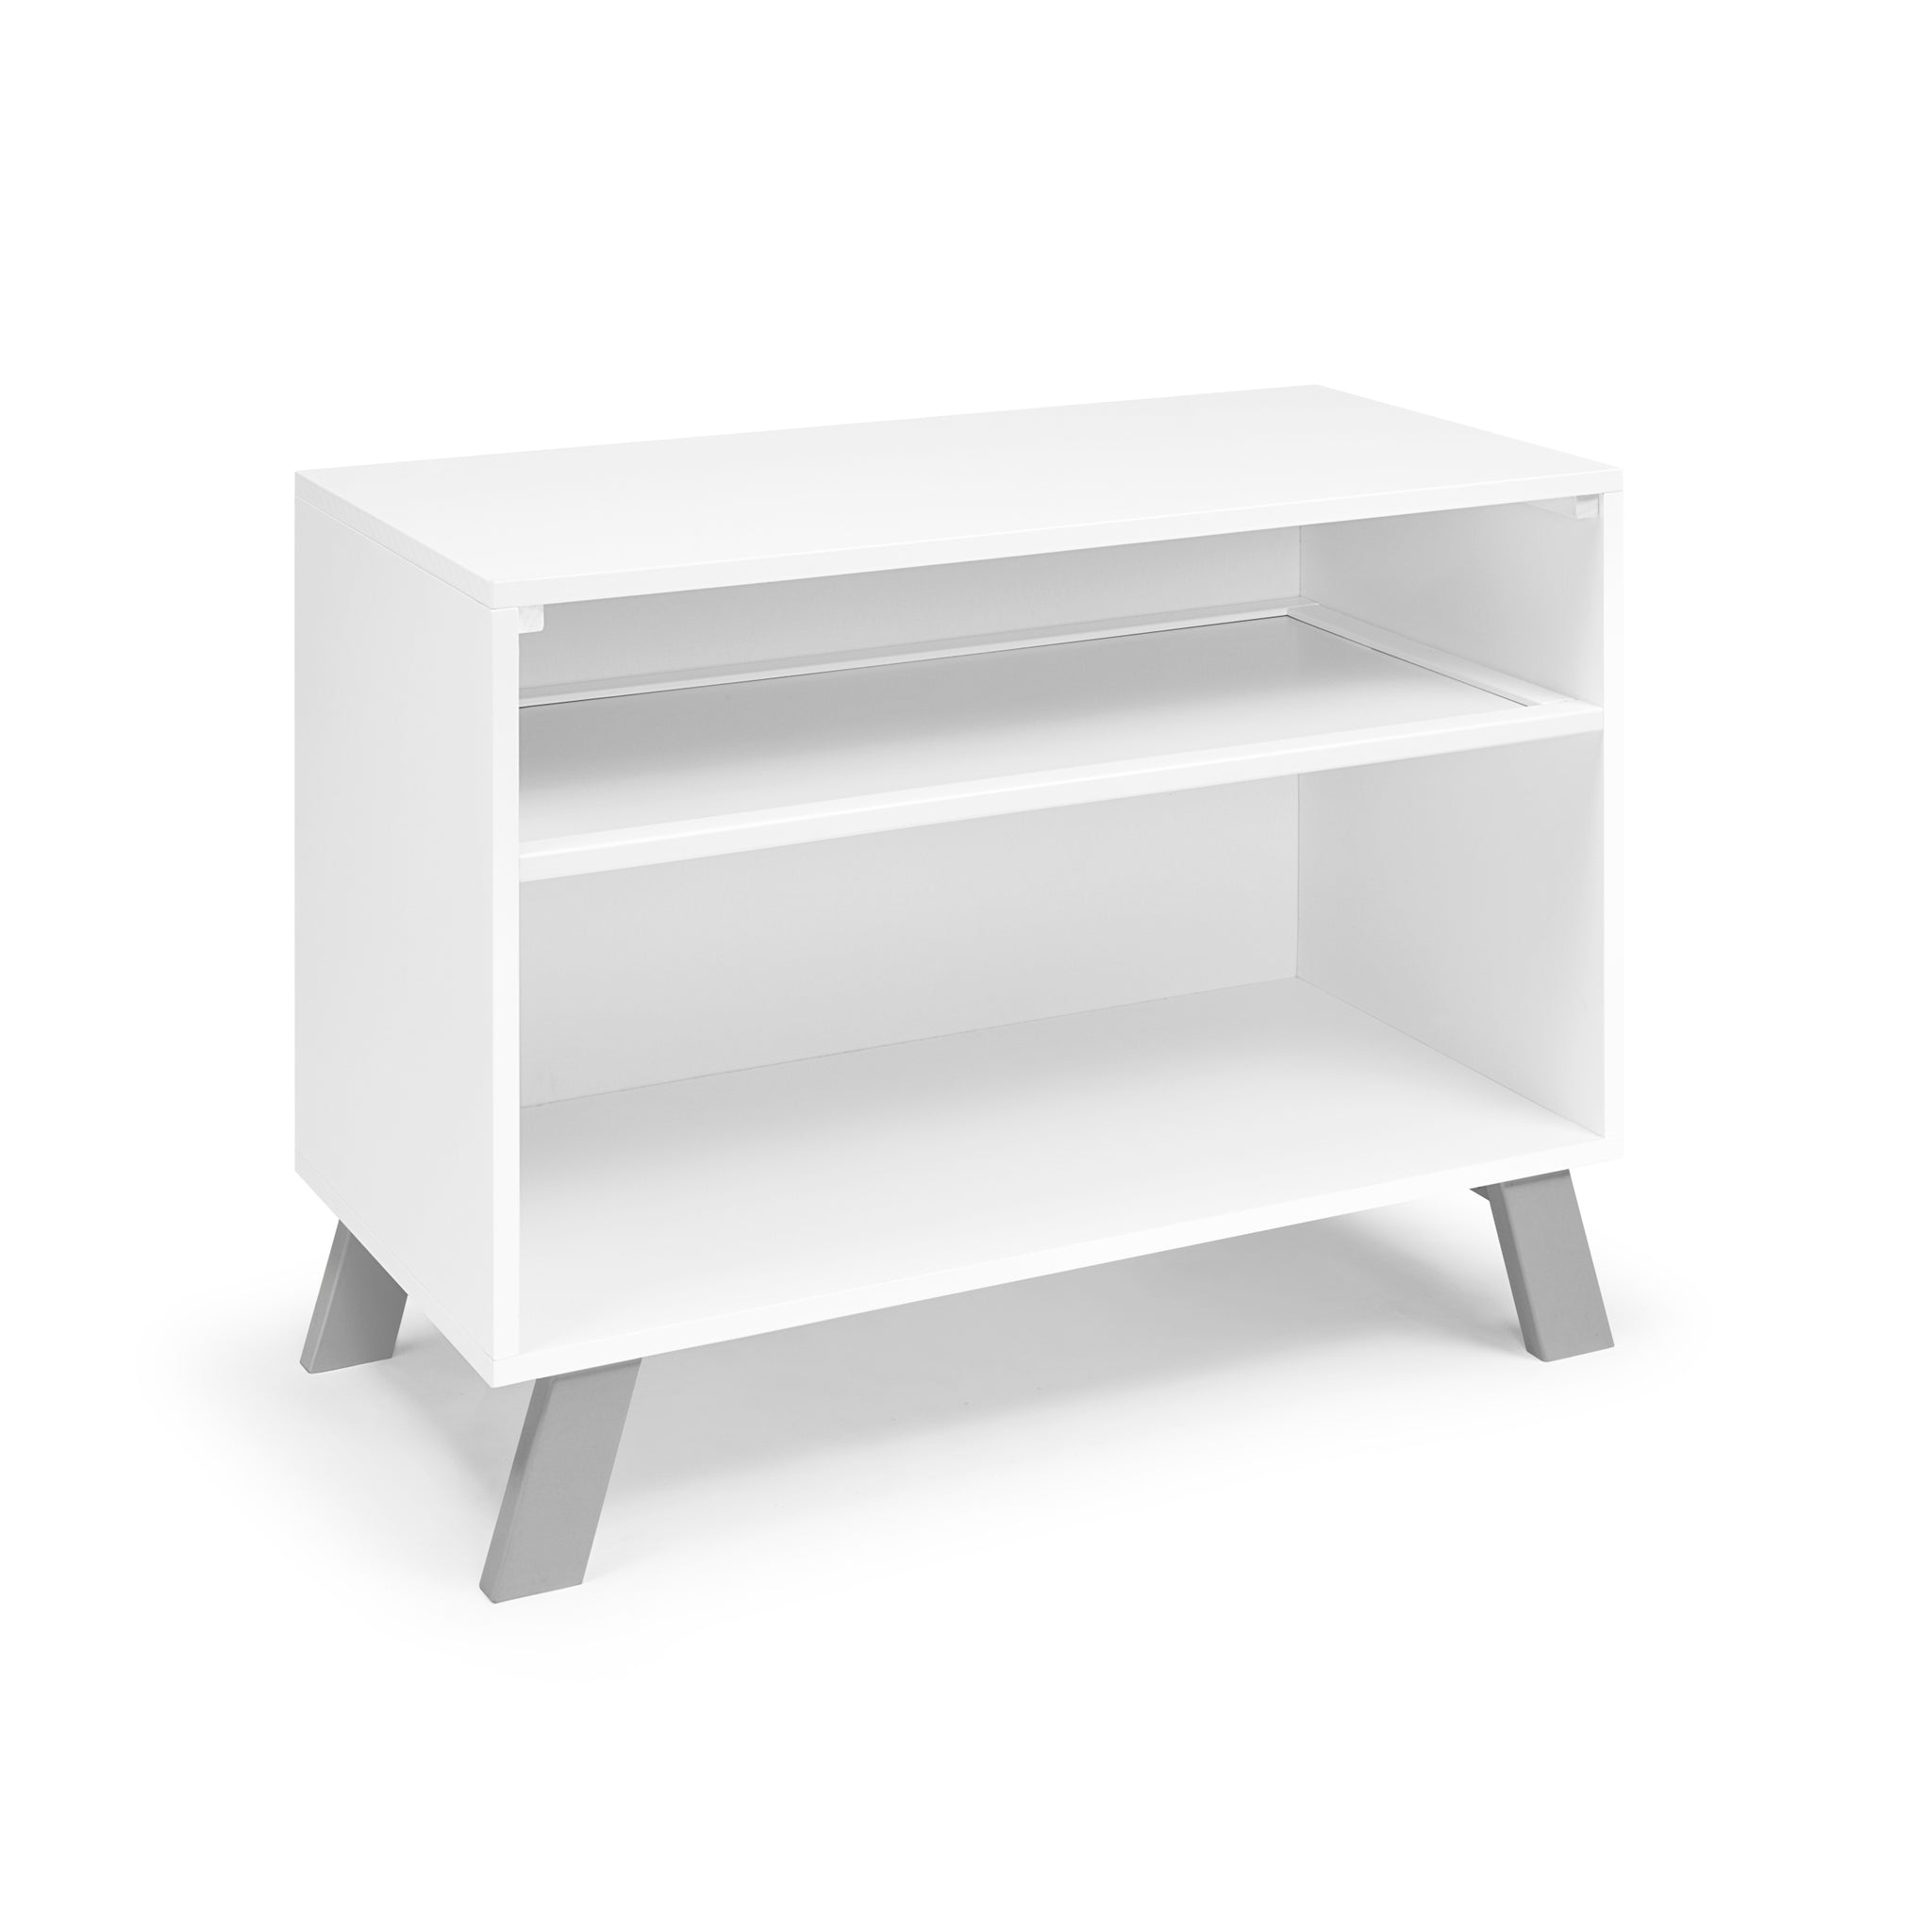 Livia Multi Purpose Changing Table White Gray white-solid wood